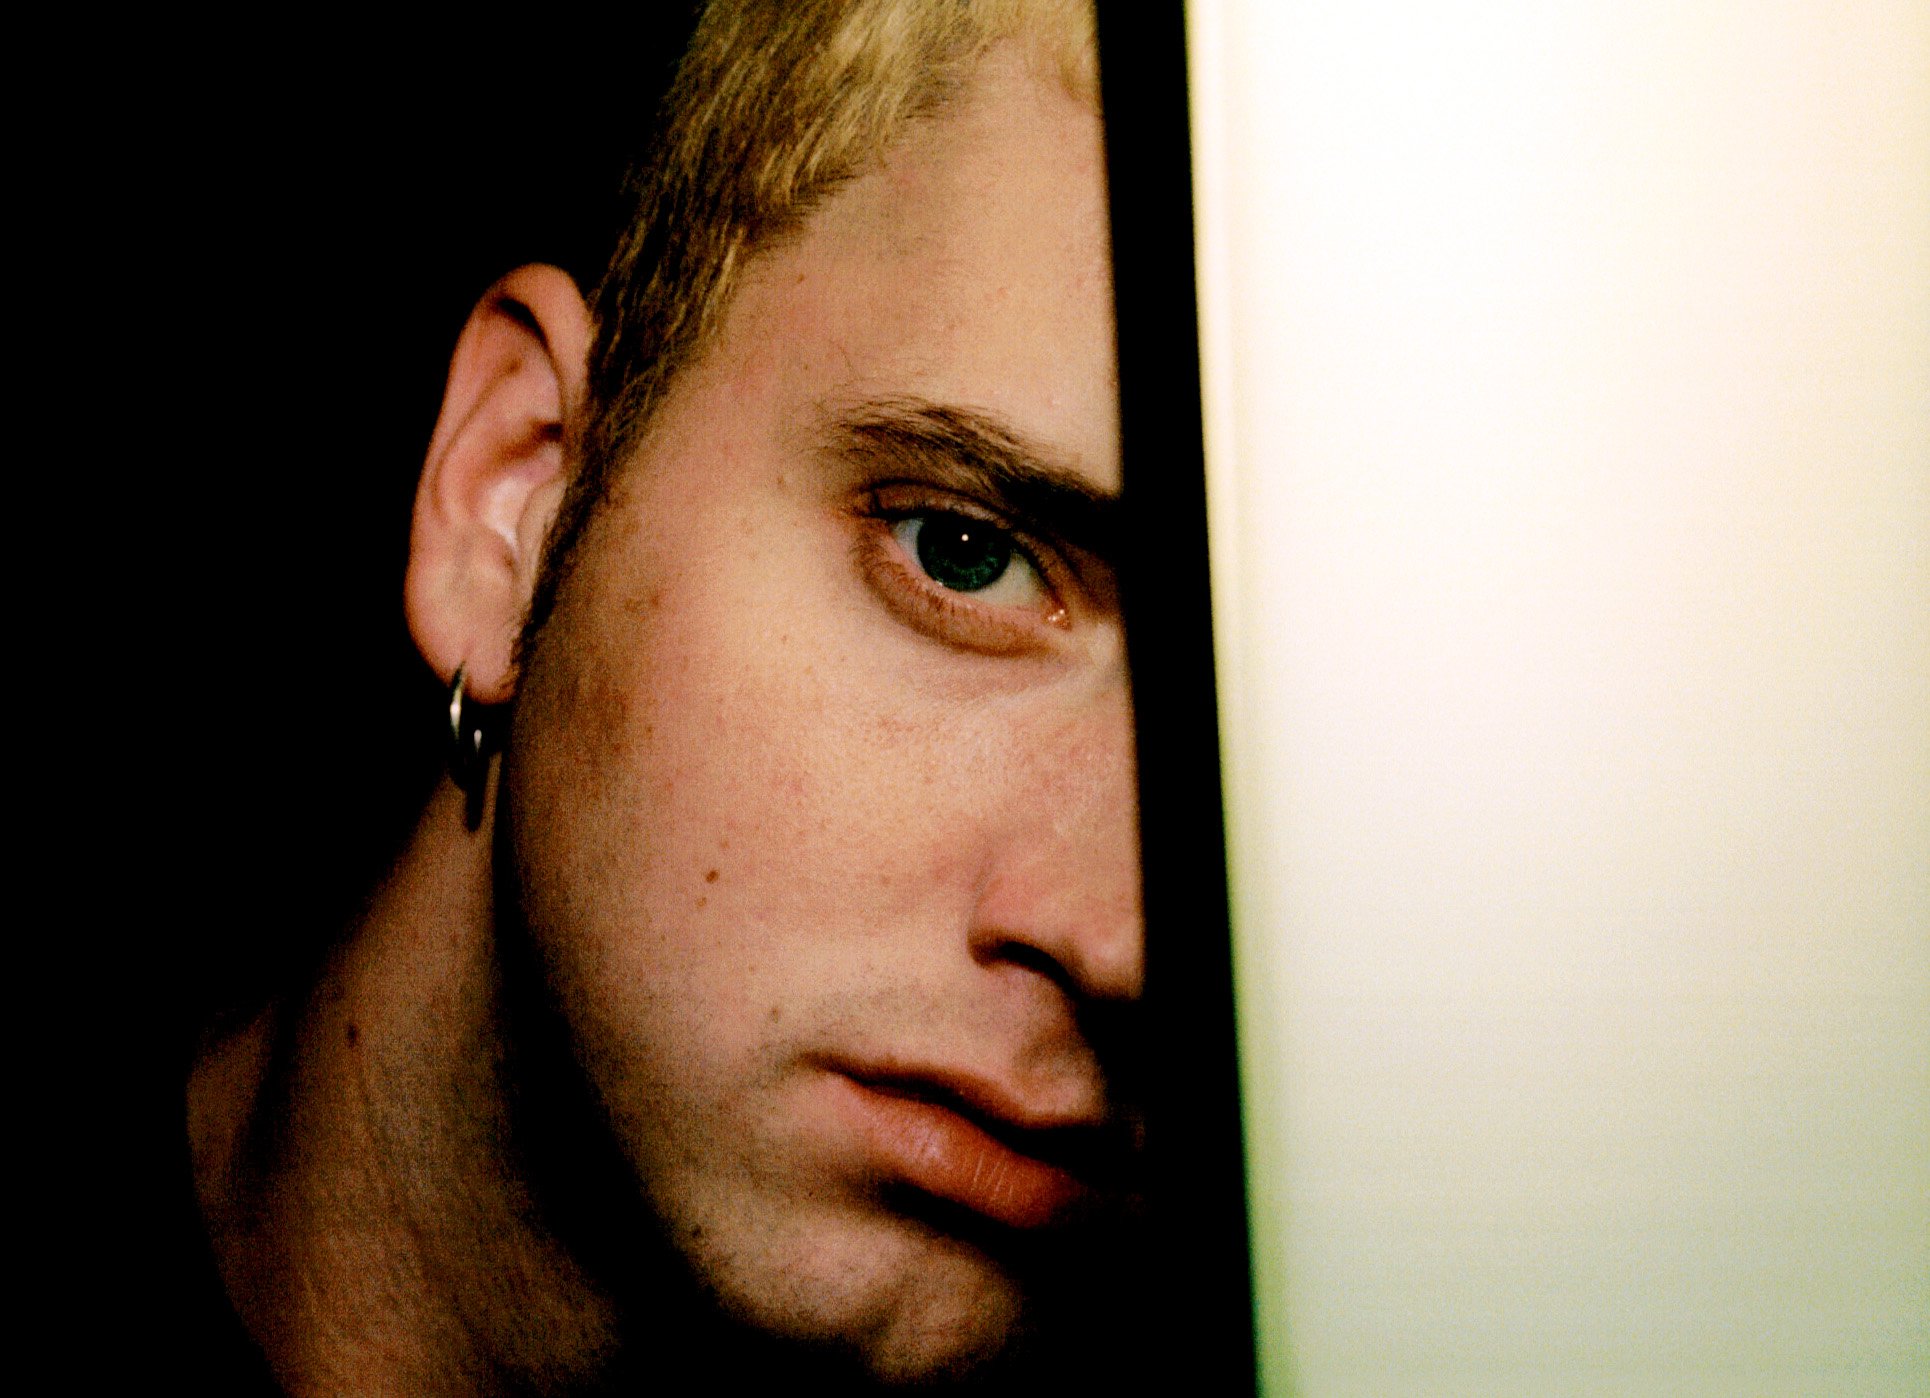 Eminem with his face partly obscured